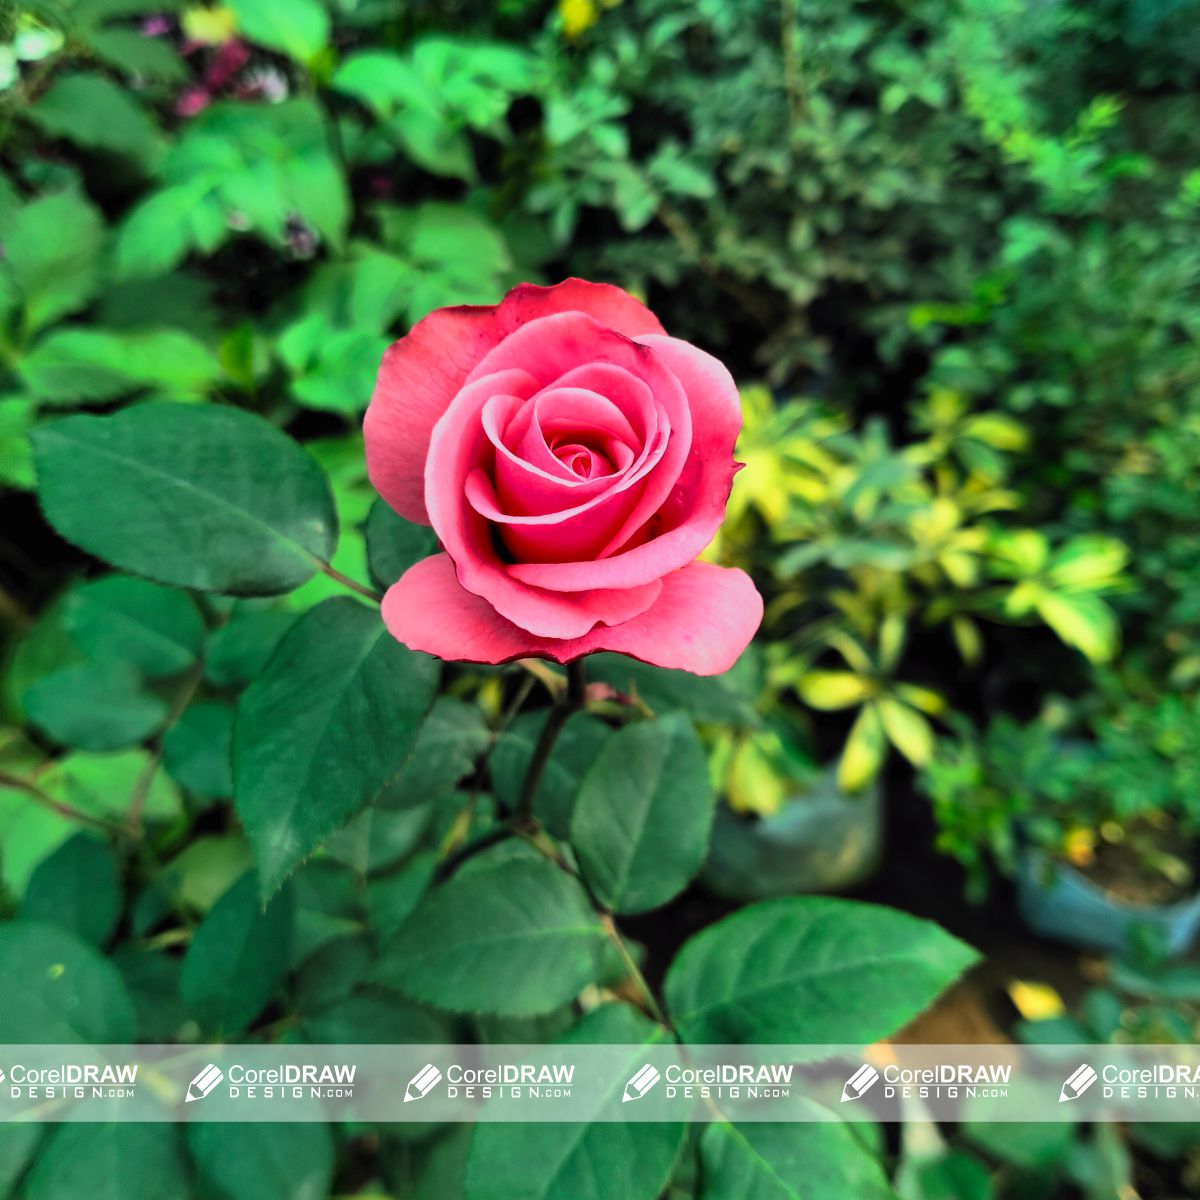 light pink rose with green background poster for free image